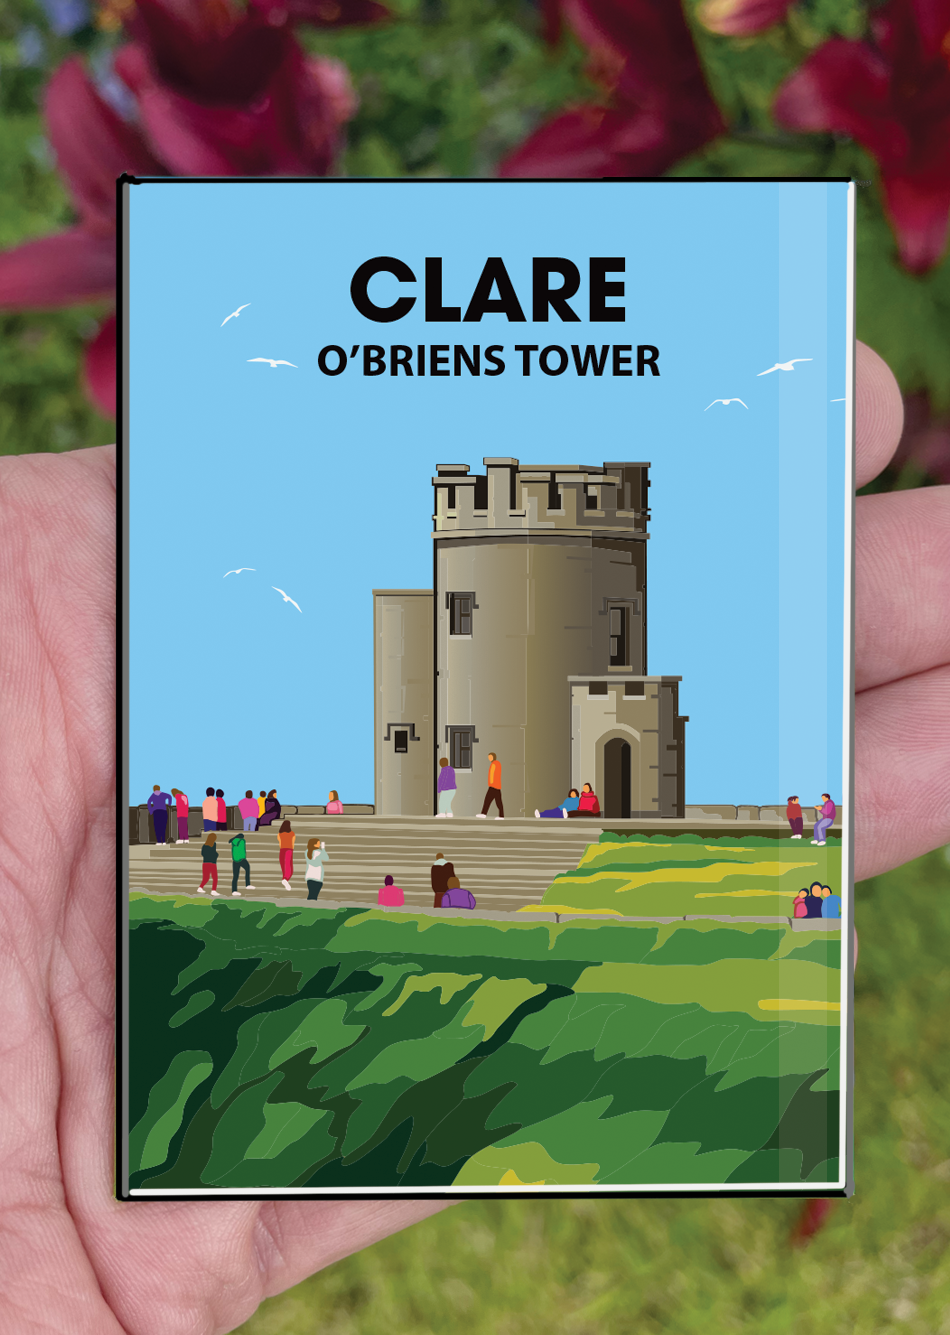 Clare Postcard or A4 Mounted Print or Fridge Magnet - OBriens Tower - Cliffs of Moher